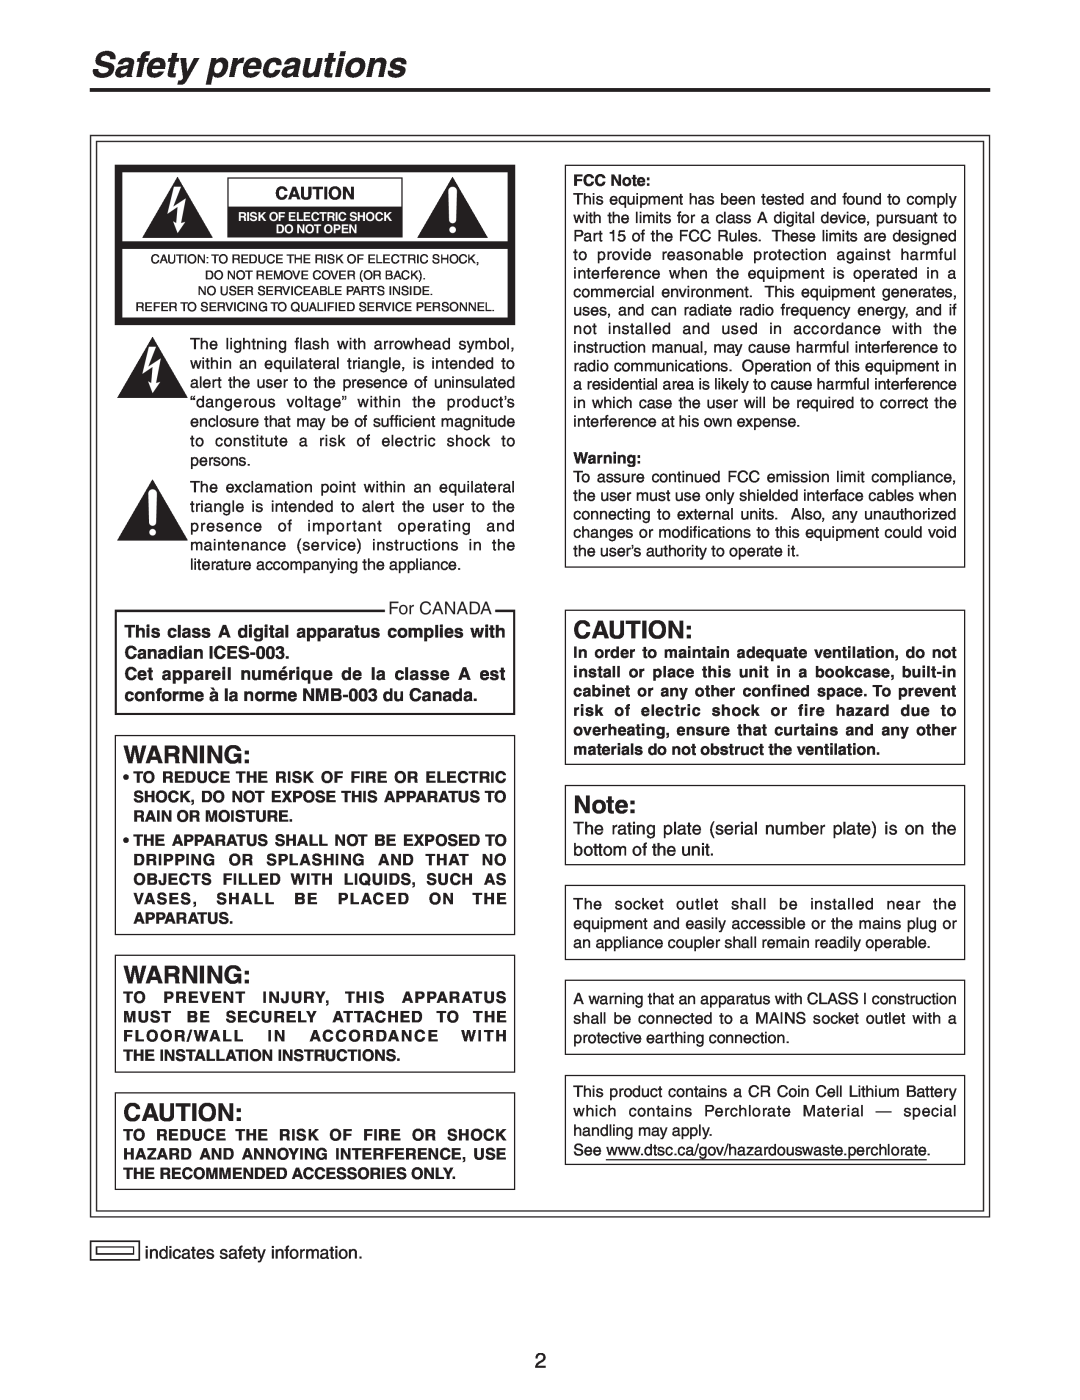 Panasonic AW-PH650N manual Safety precautions, For CANADA, This class A digital apparatus complies with Canadian ICES-003 